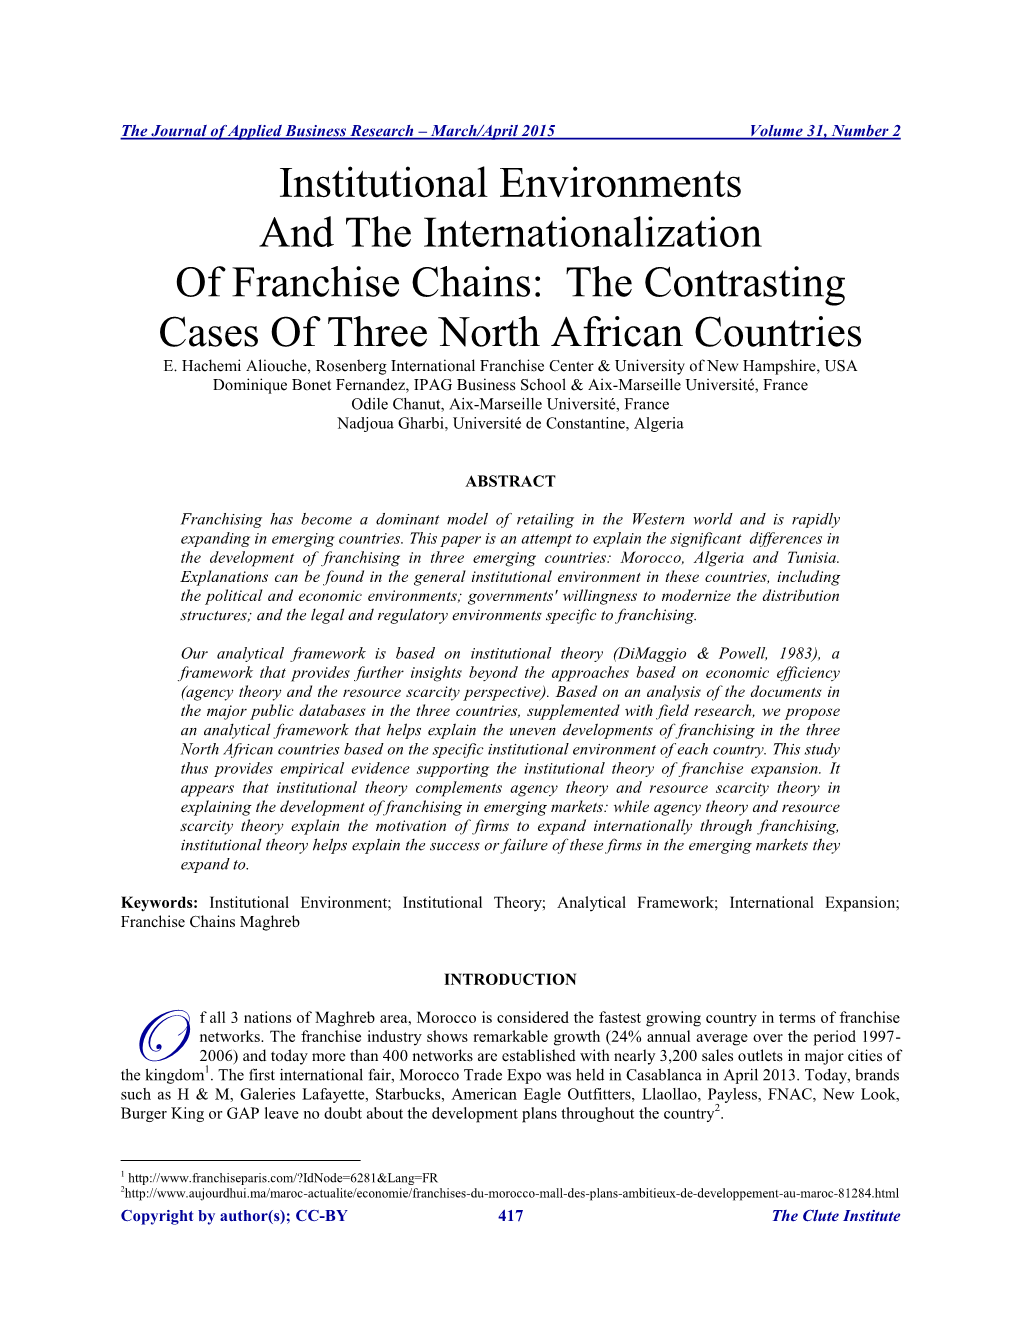 Institutional Environments and the Internationalization of Franchise Chains: the Contrasting Cases of Three North African Countries E